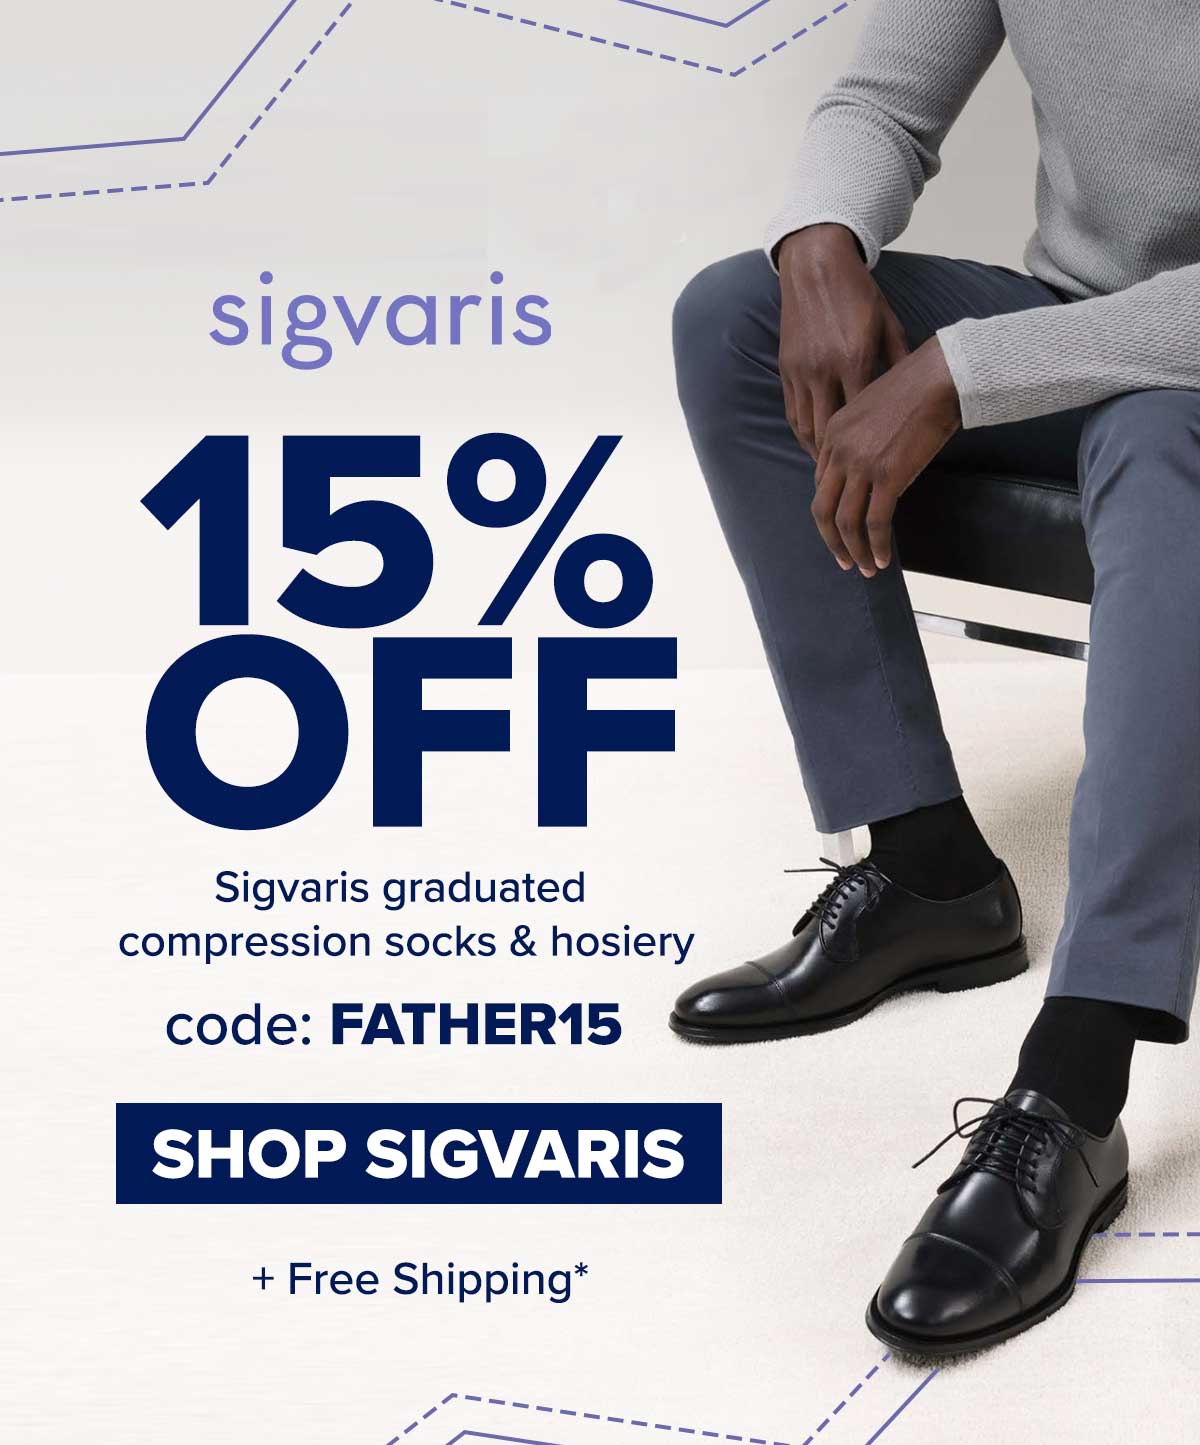 Get 15% off Sigvaris for Father's Day with code: FATHER15